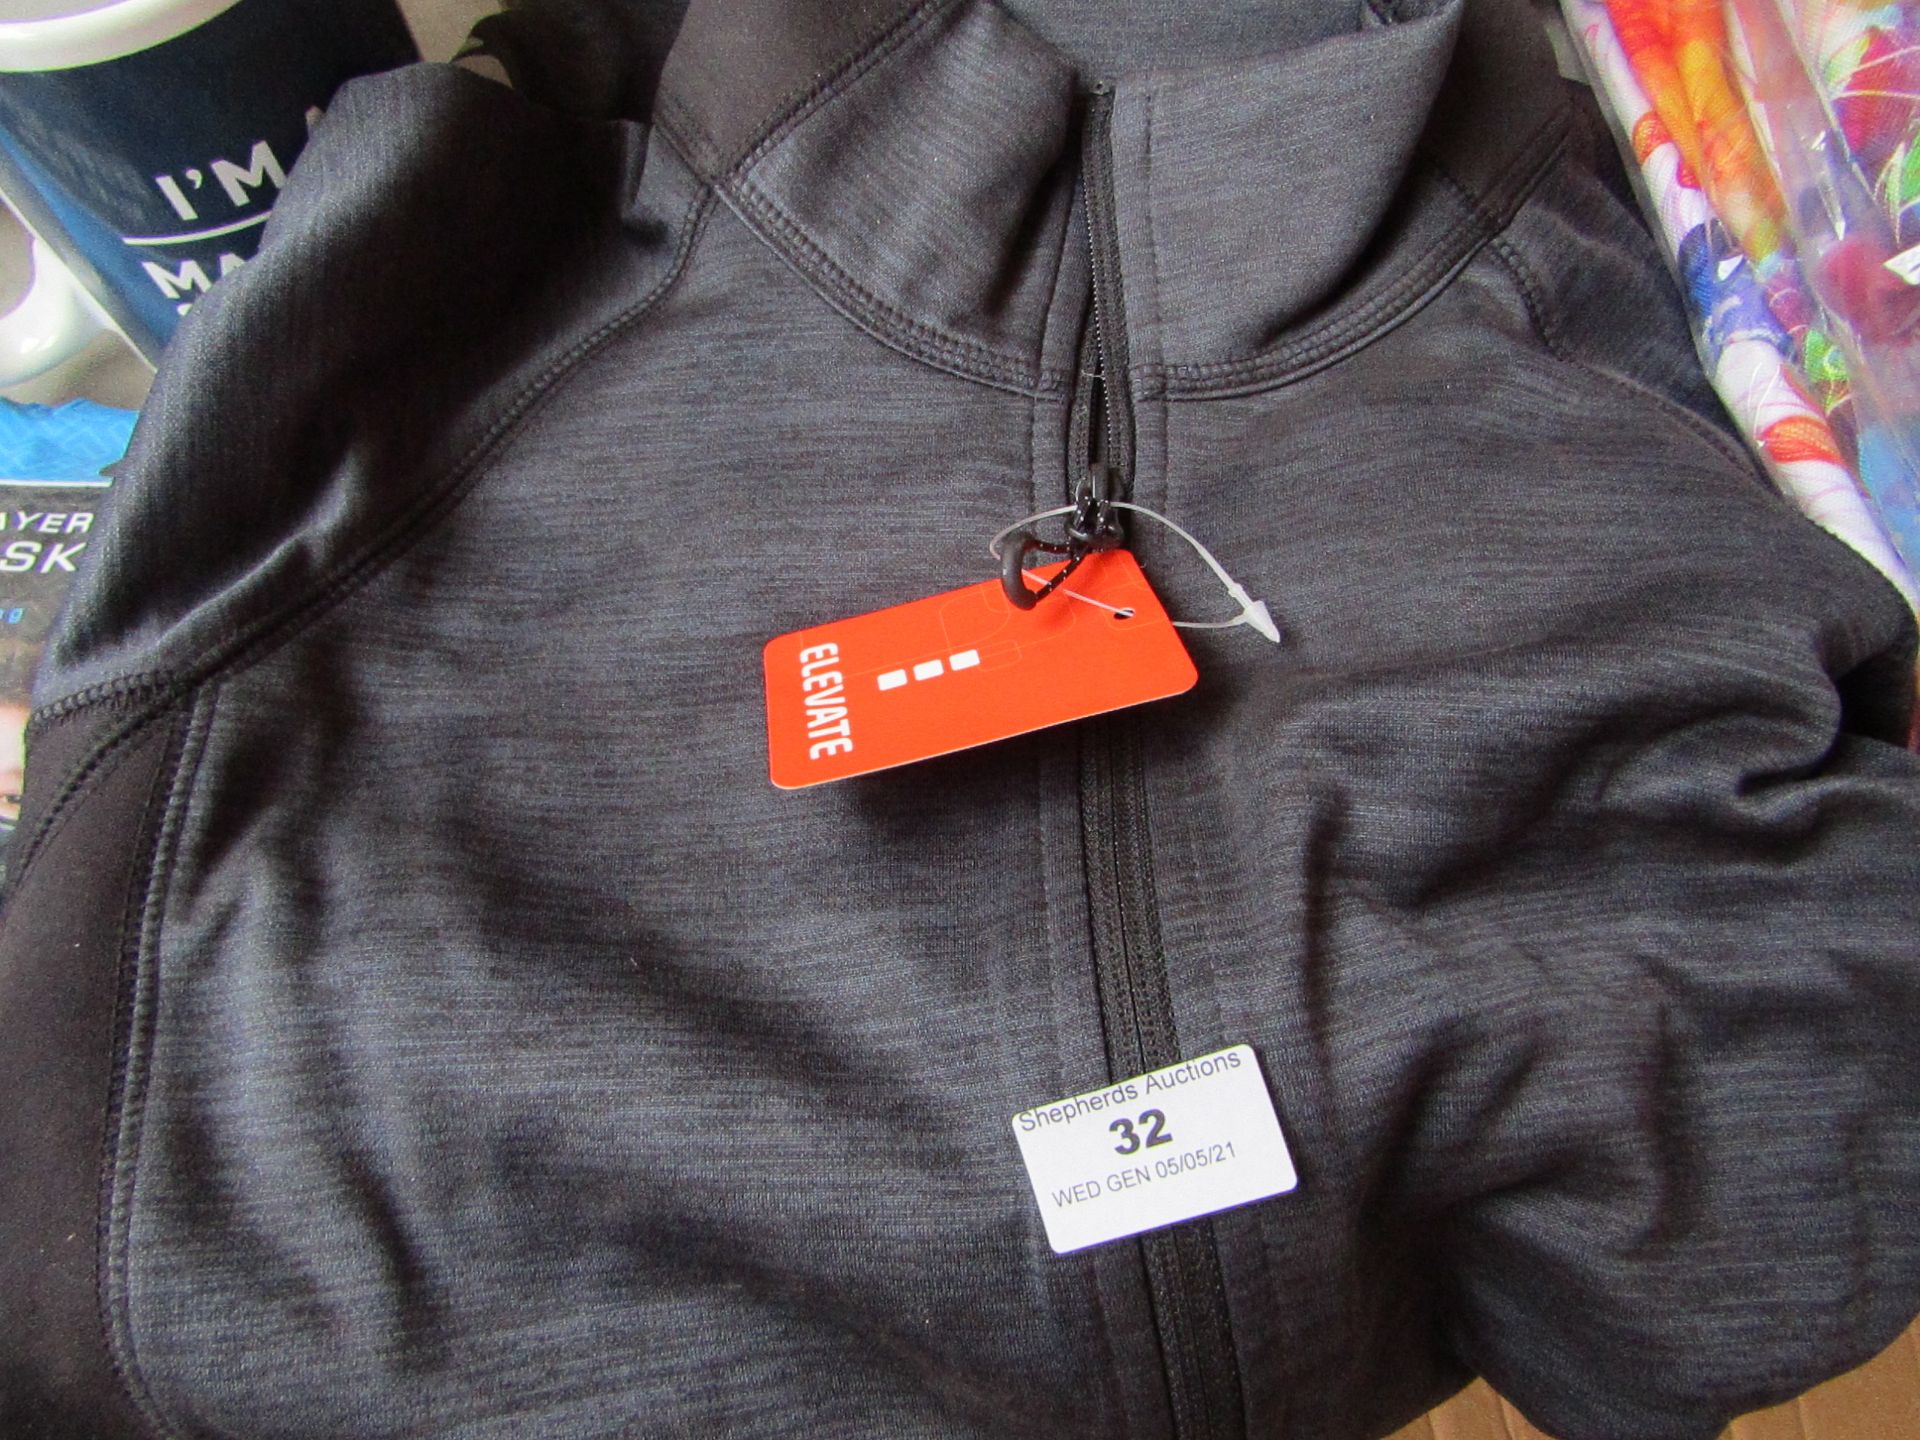 Elevate - Richmond Knit Charcoal Jacket - Size XS - Original Tags. - May Need A Wash As Item Is